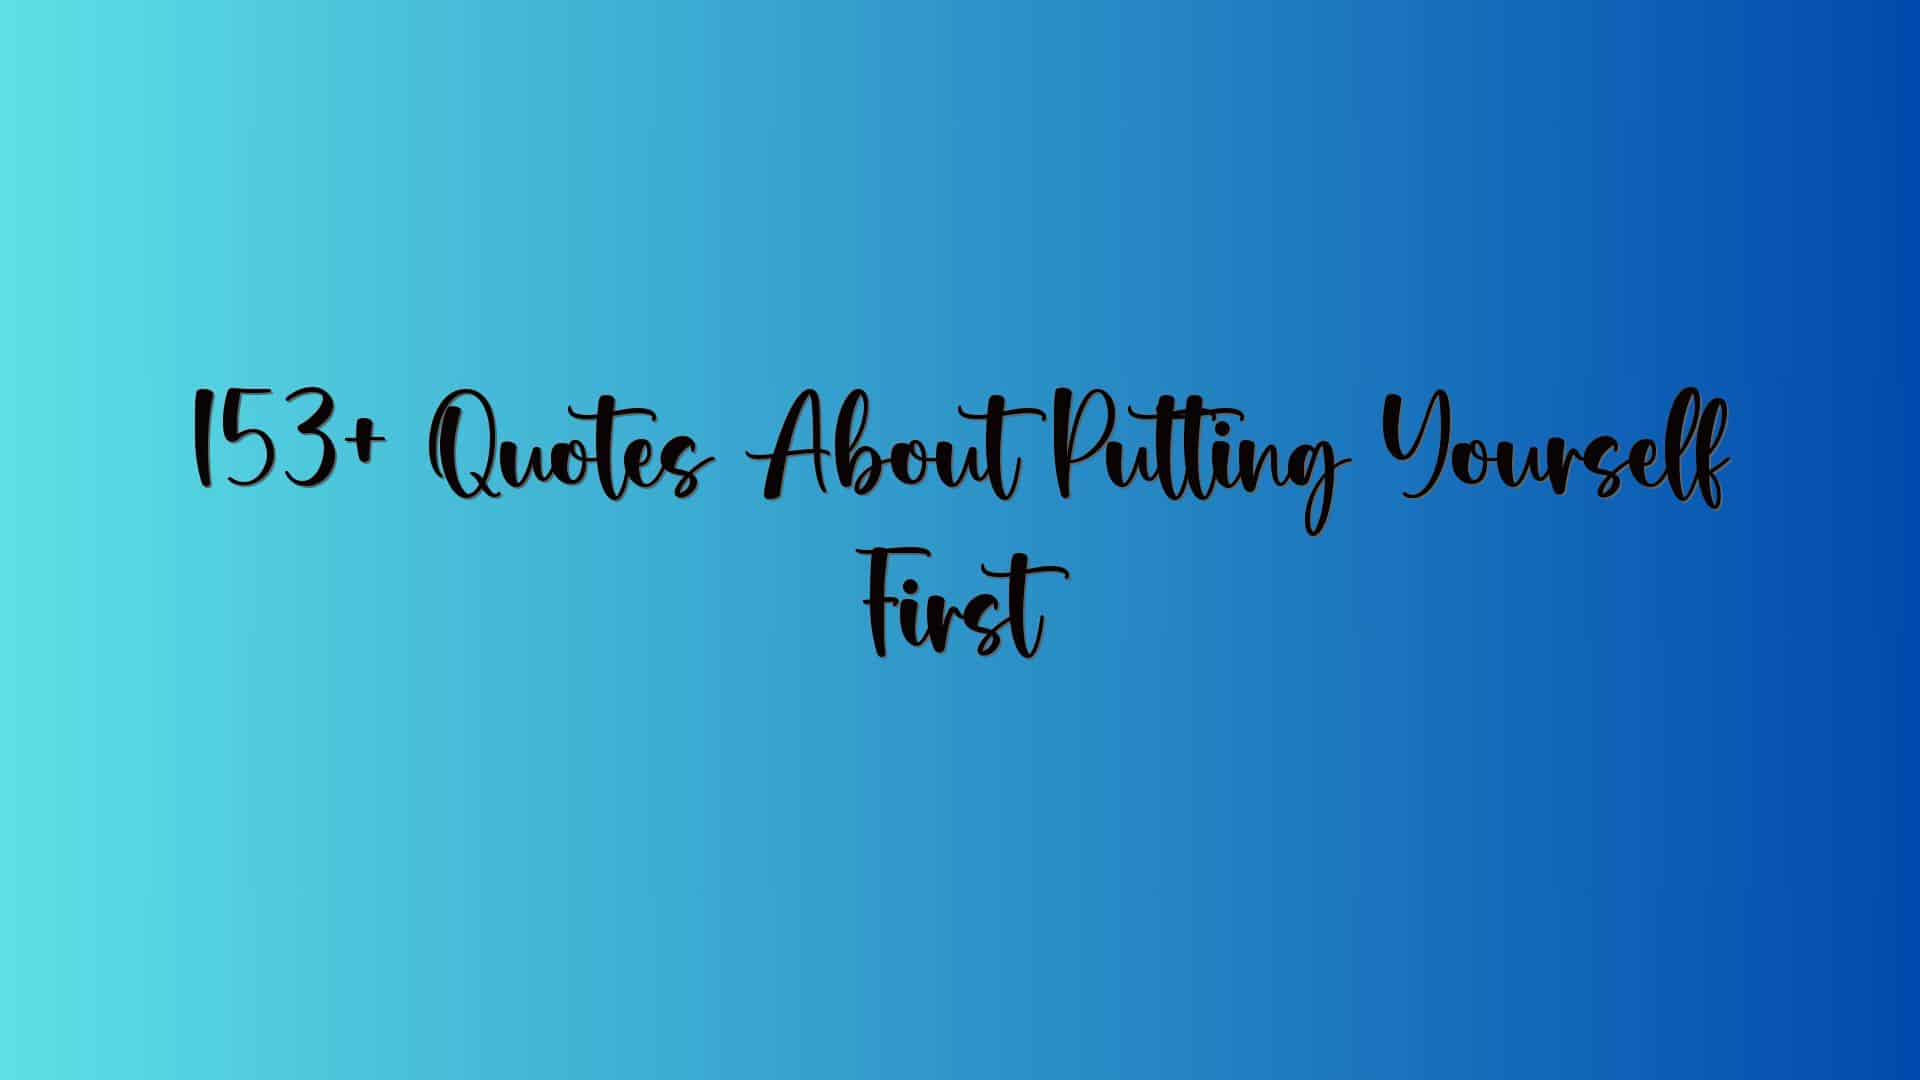 153+ Quotes About Putting Yourself First